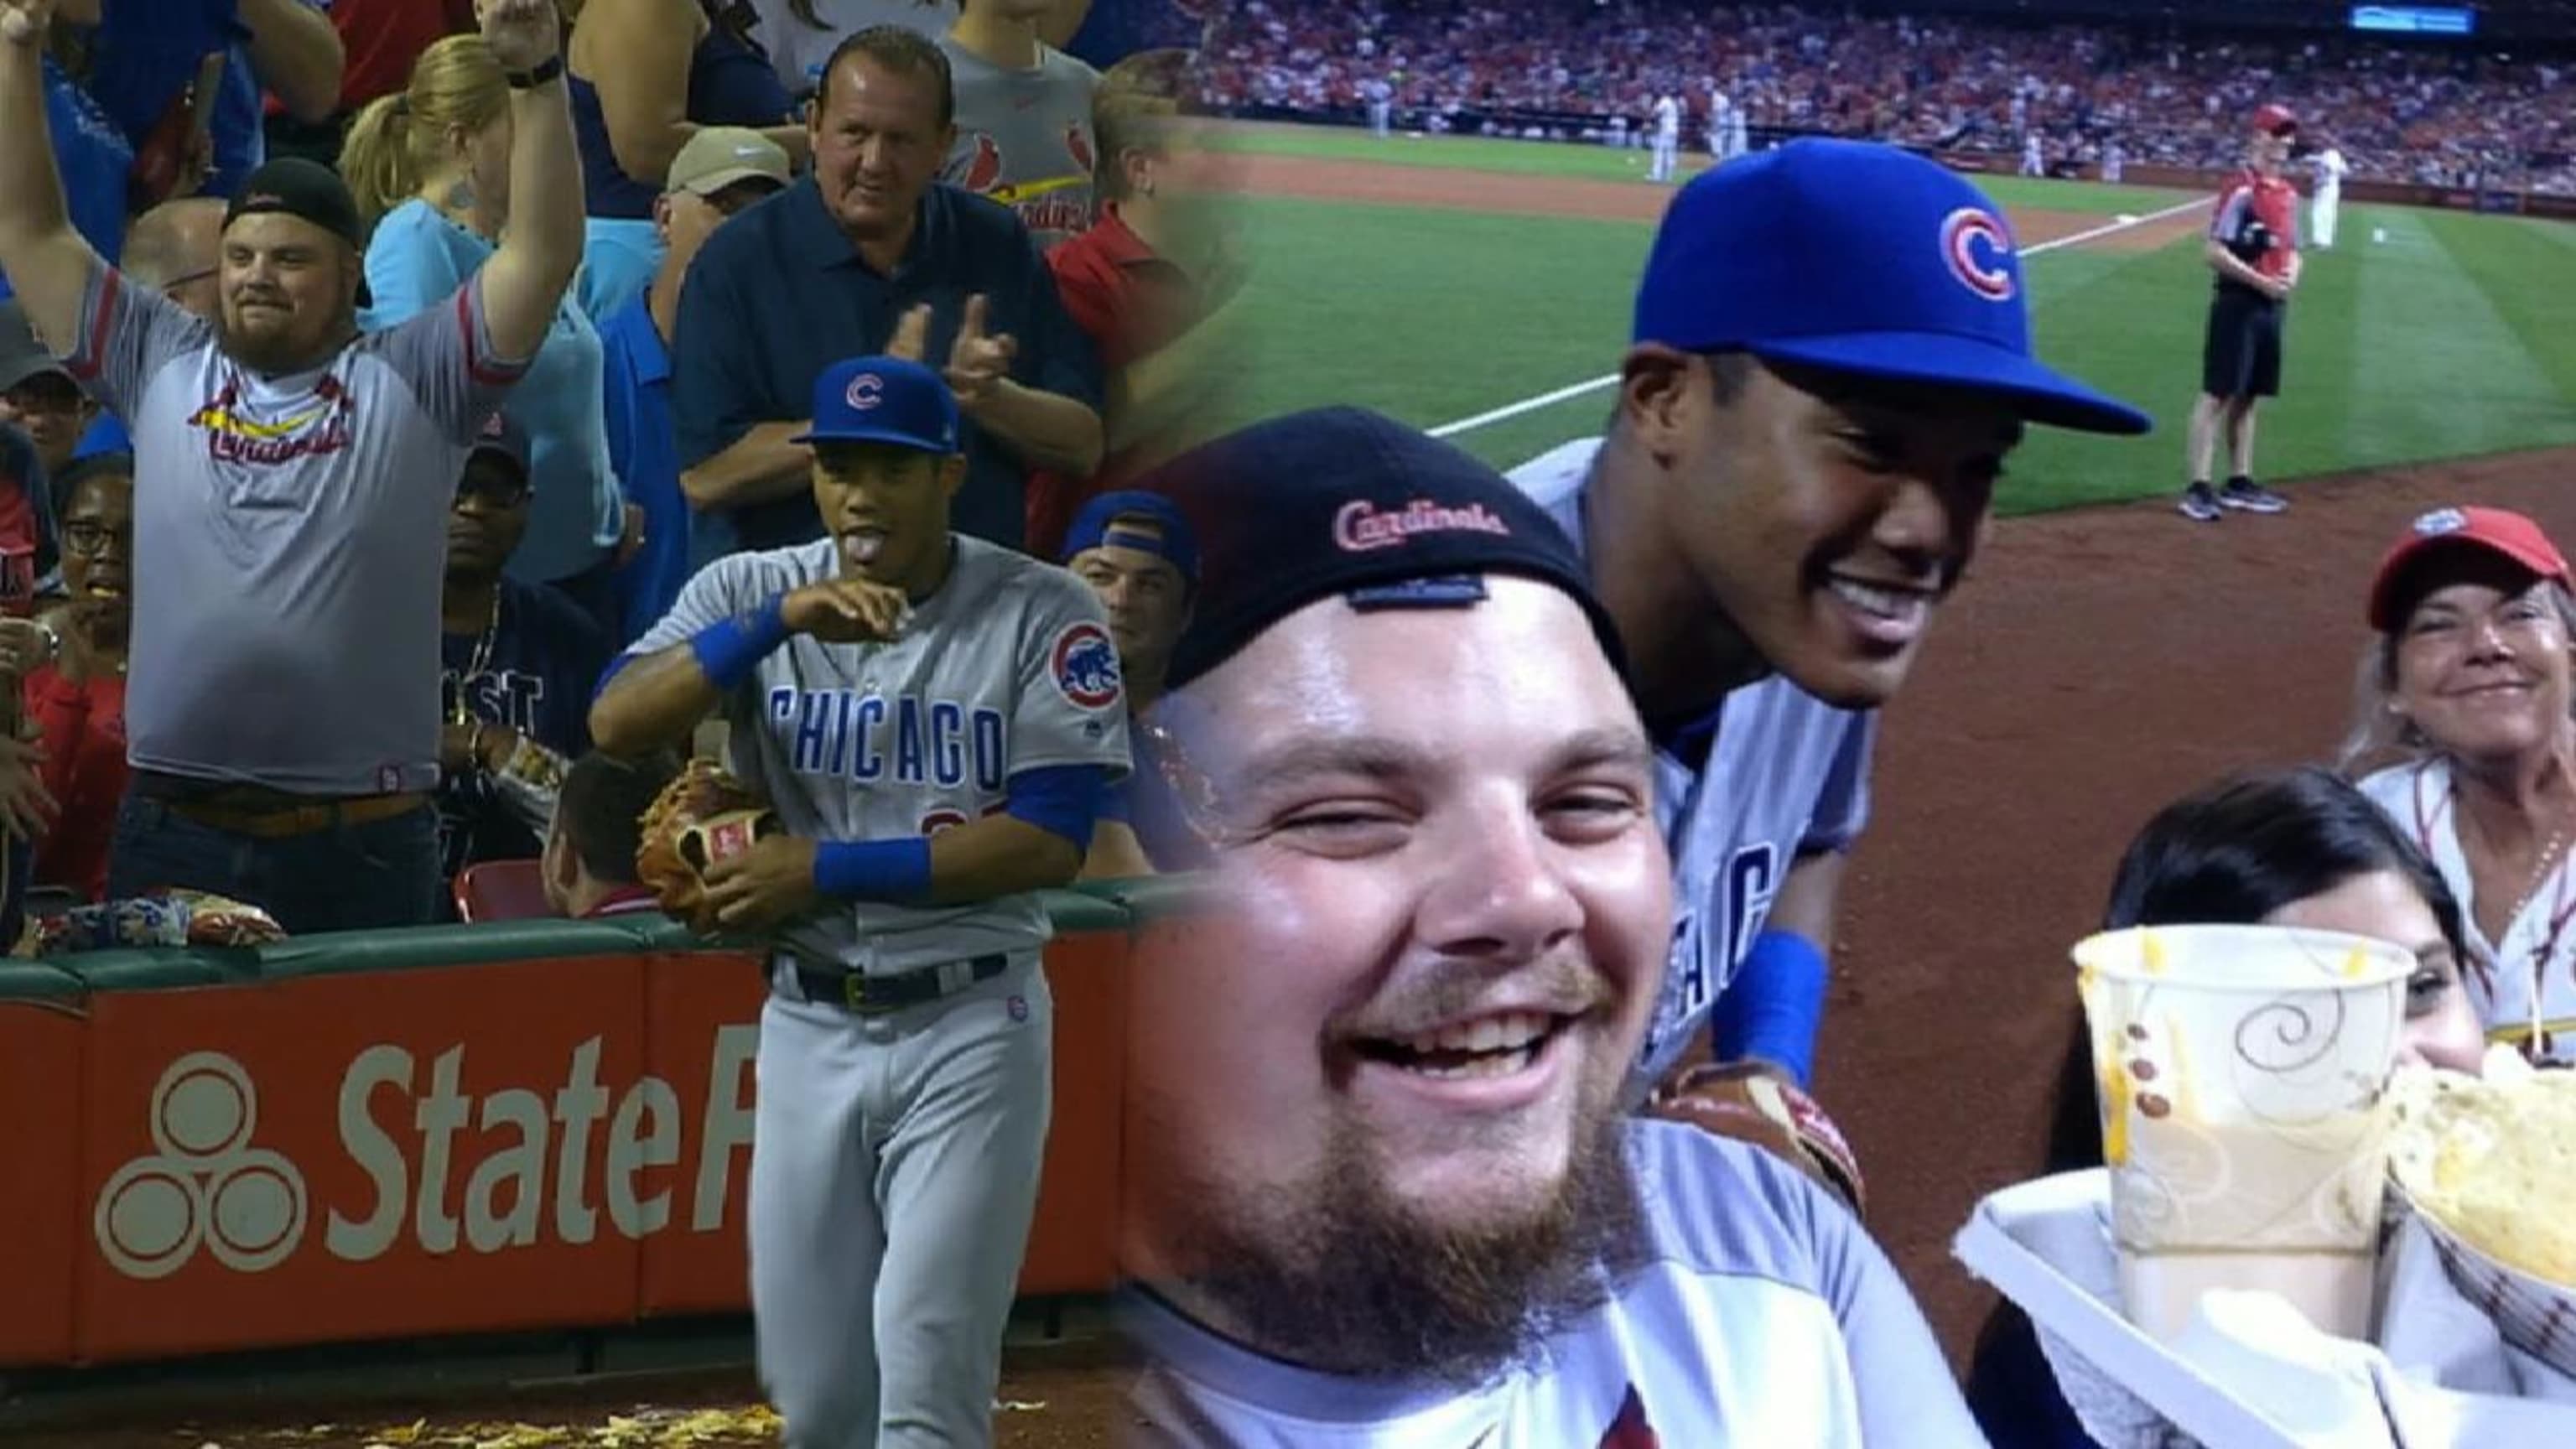 Addison Russell kindly replaced a fan's nachos after a foul ball mishap